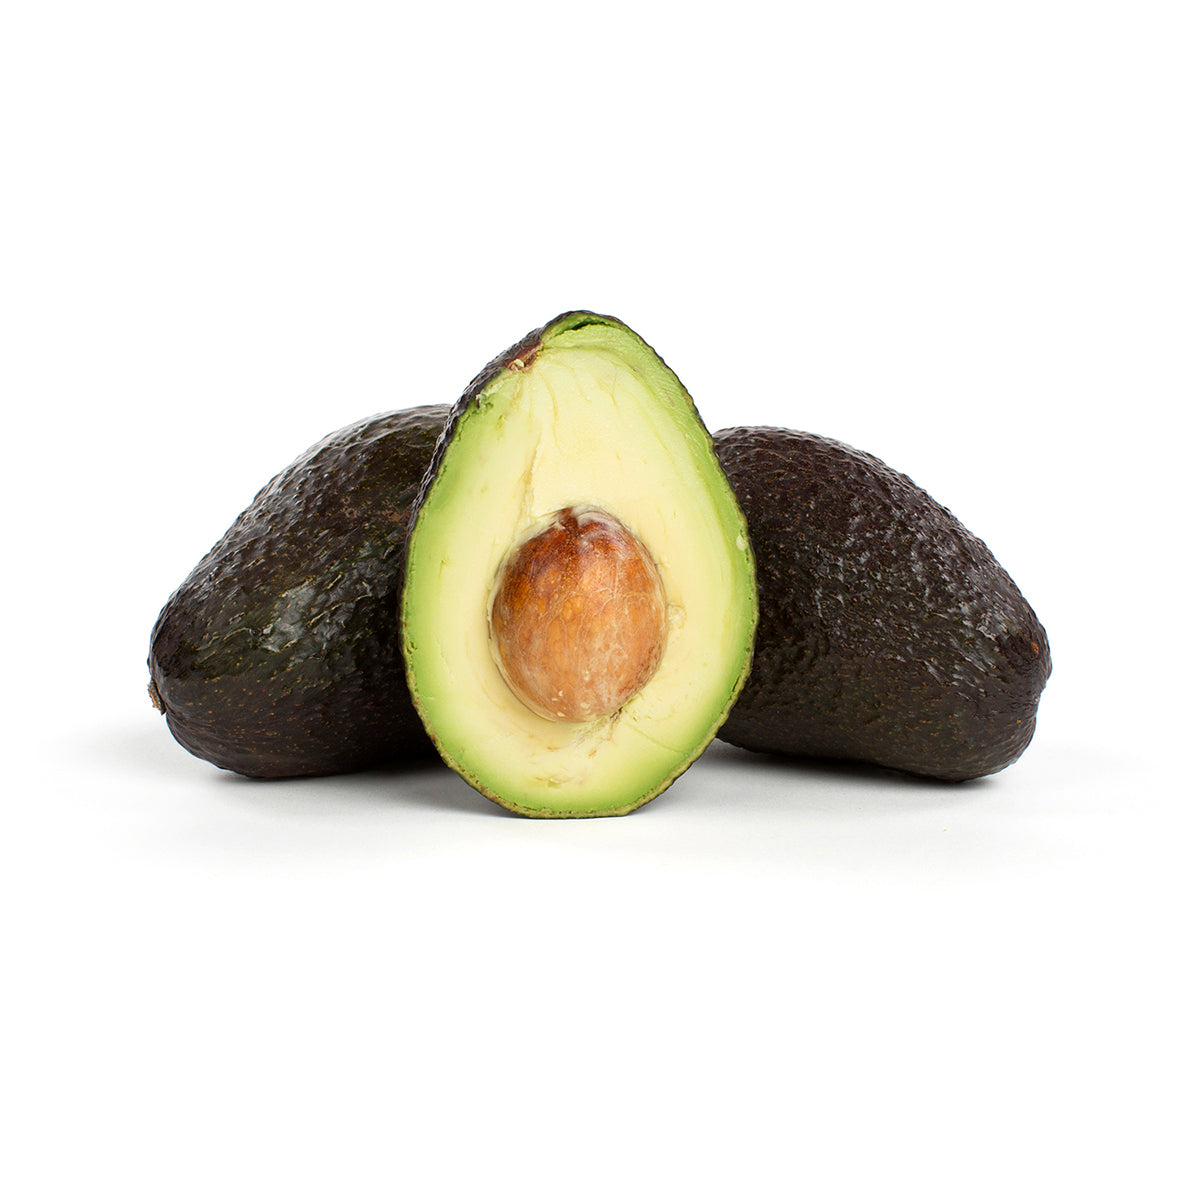 Avocados From Mexico Ripe Hass Avocados 3 Pack